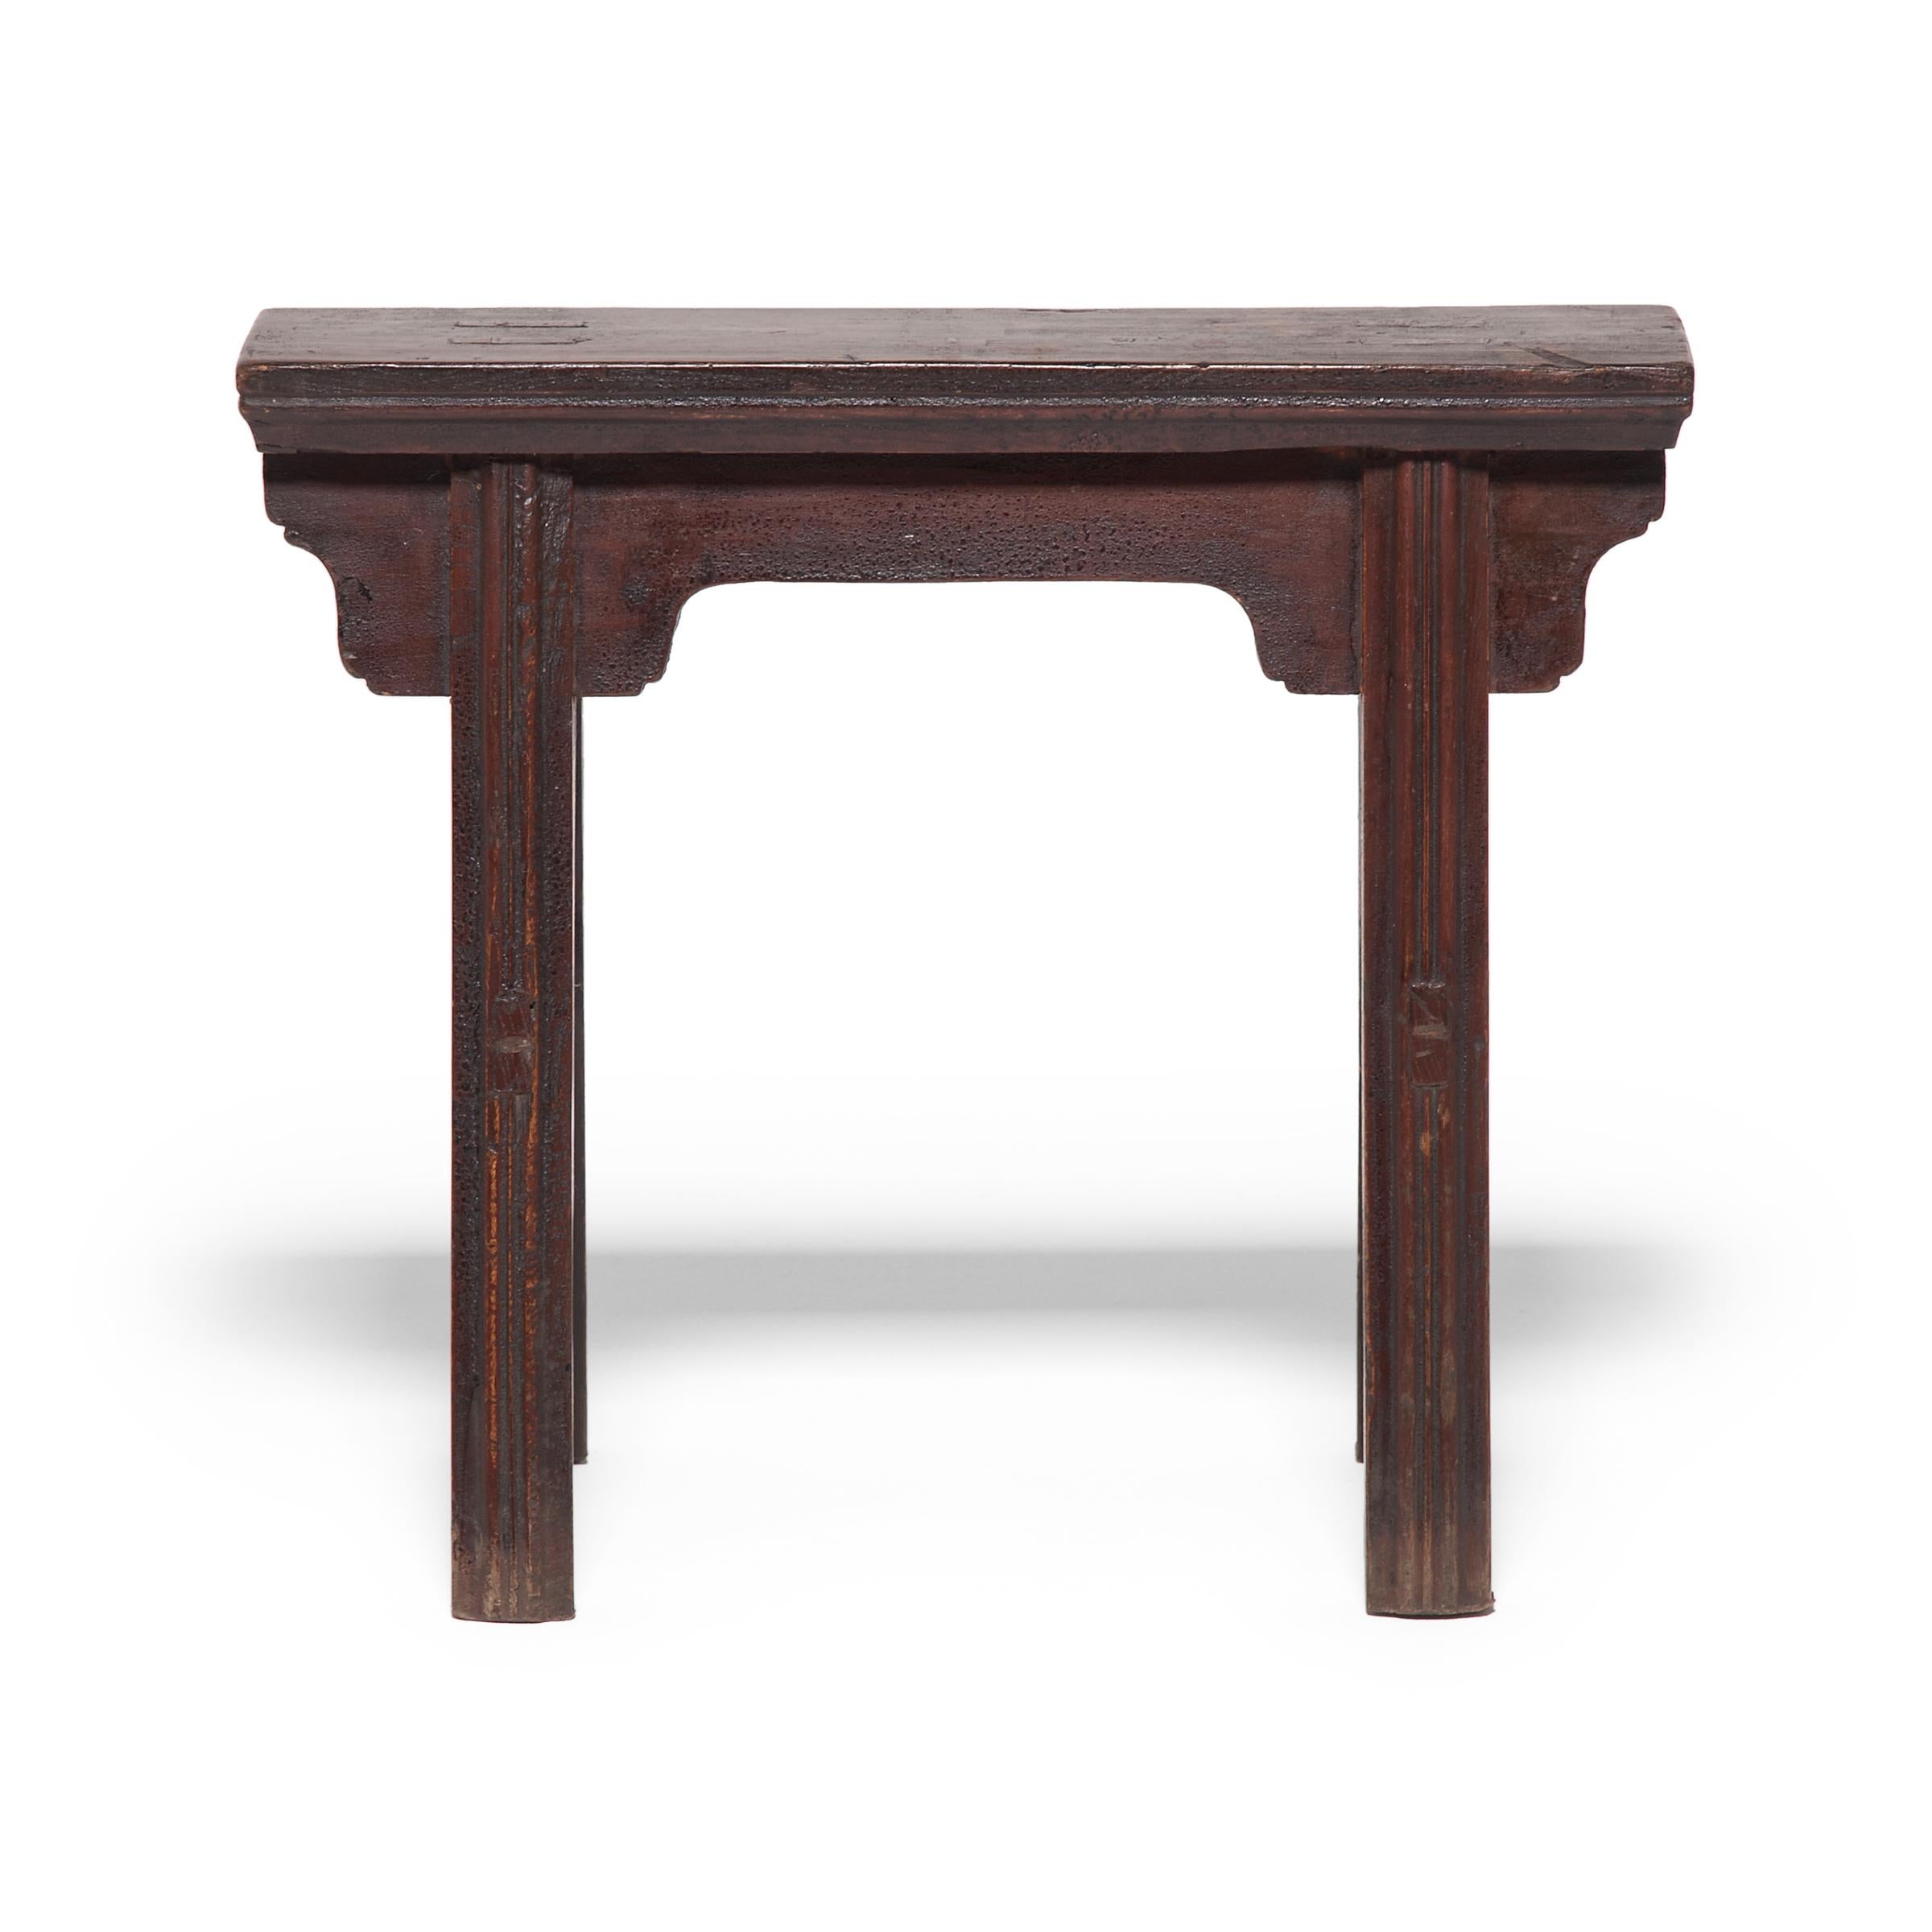 Elegantly simple in design, this pair of carriage benches from China's Zhejiang province celebrates the beauty of clean lines. Made of northern elmwood, each bench was constructed with mortise-and-tenon joinery techniques - an age-old method of